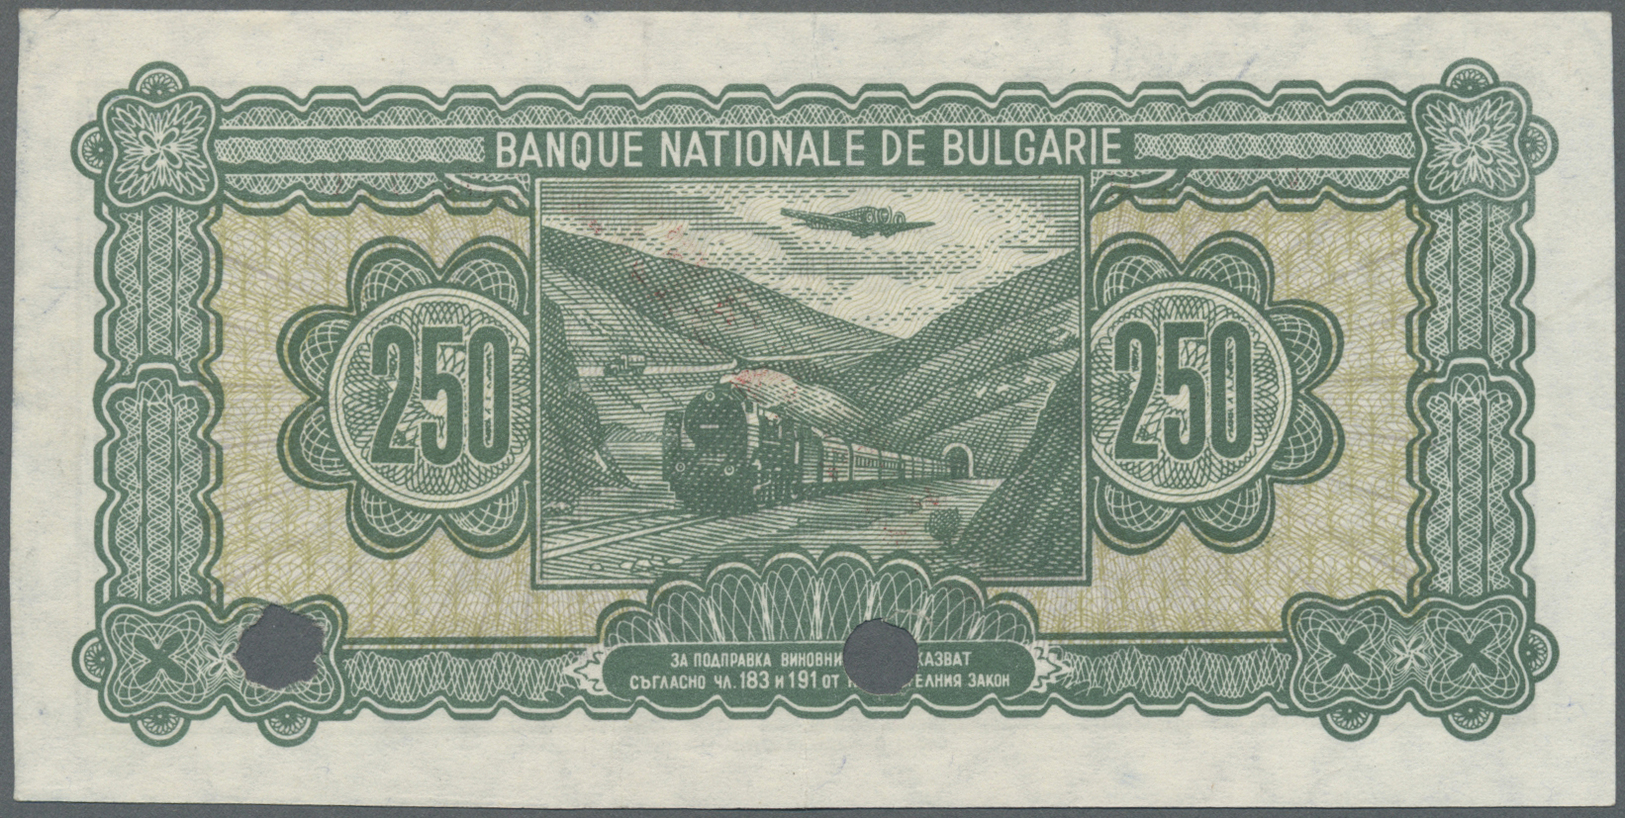 00433 Bulgaria / Bulgarien: 250 Leva 1948 SPECIMEN, P.76s With Strong Paper And Bright Colors With Cancellation Holes, T - Bulgaria